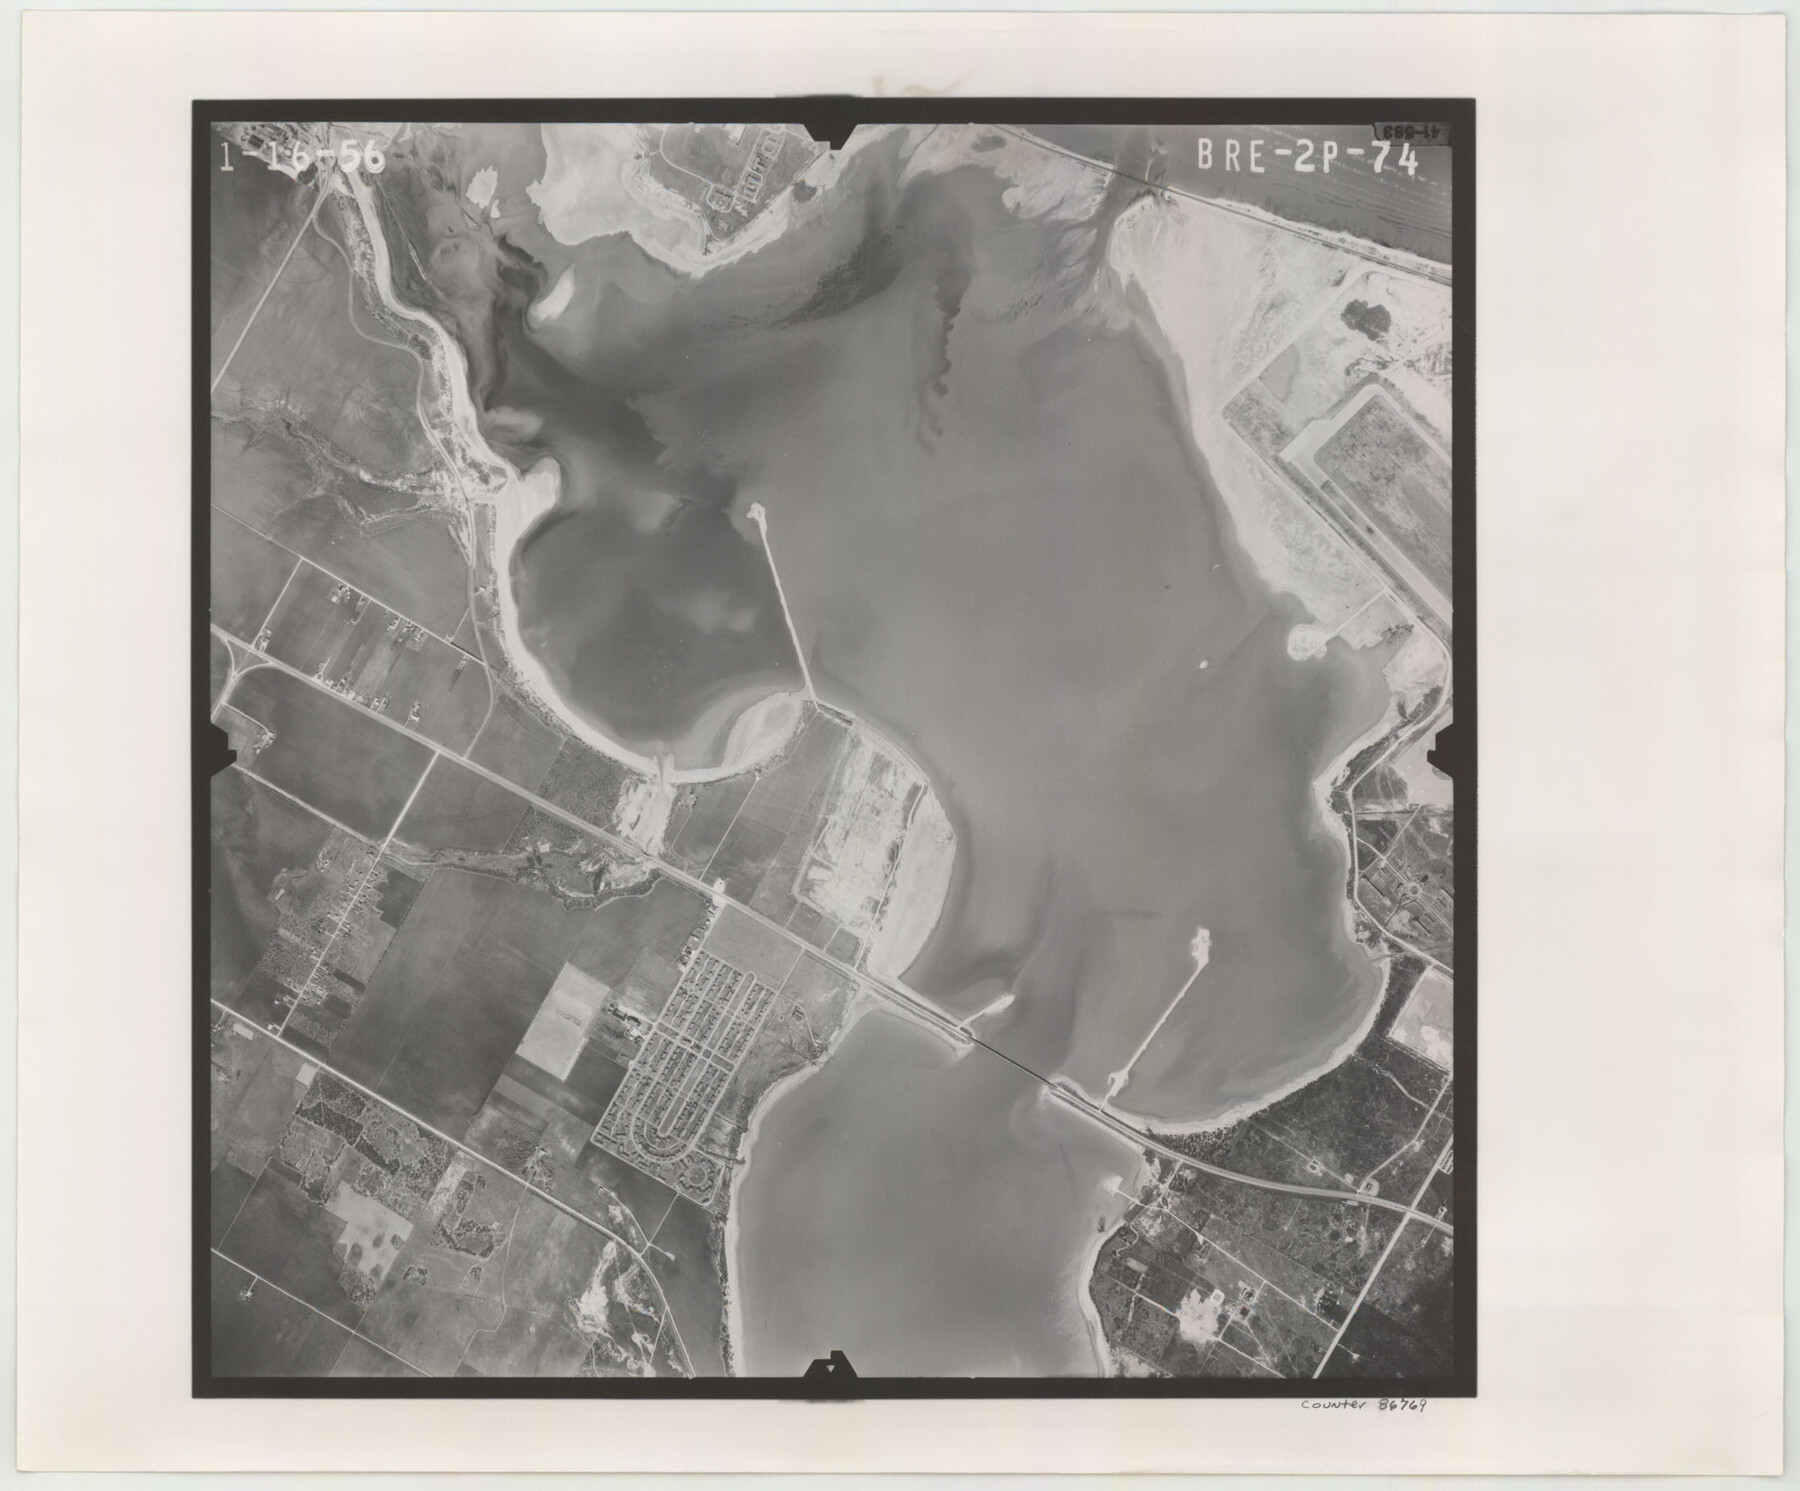 86769, Flight Mission No. BRE-2P, Frame 74, Nueces County, General Map Collection